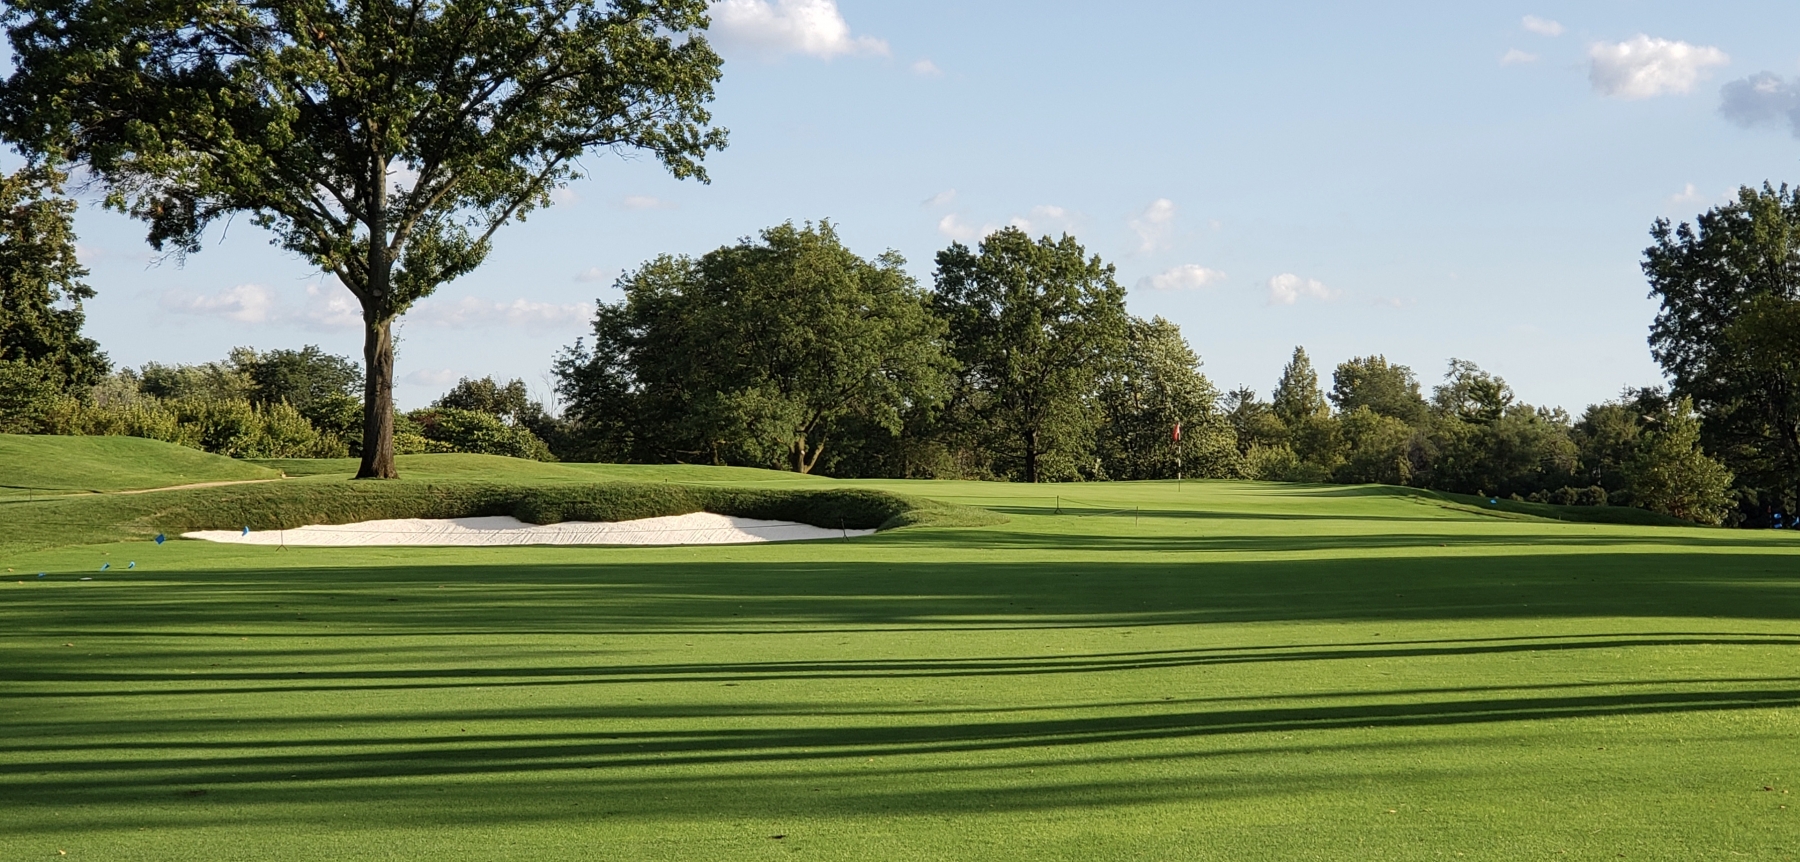 Ruth Lake Country Club - Hinsdale, Illinois